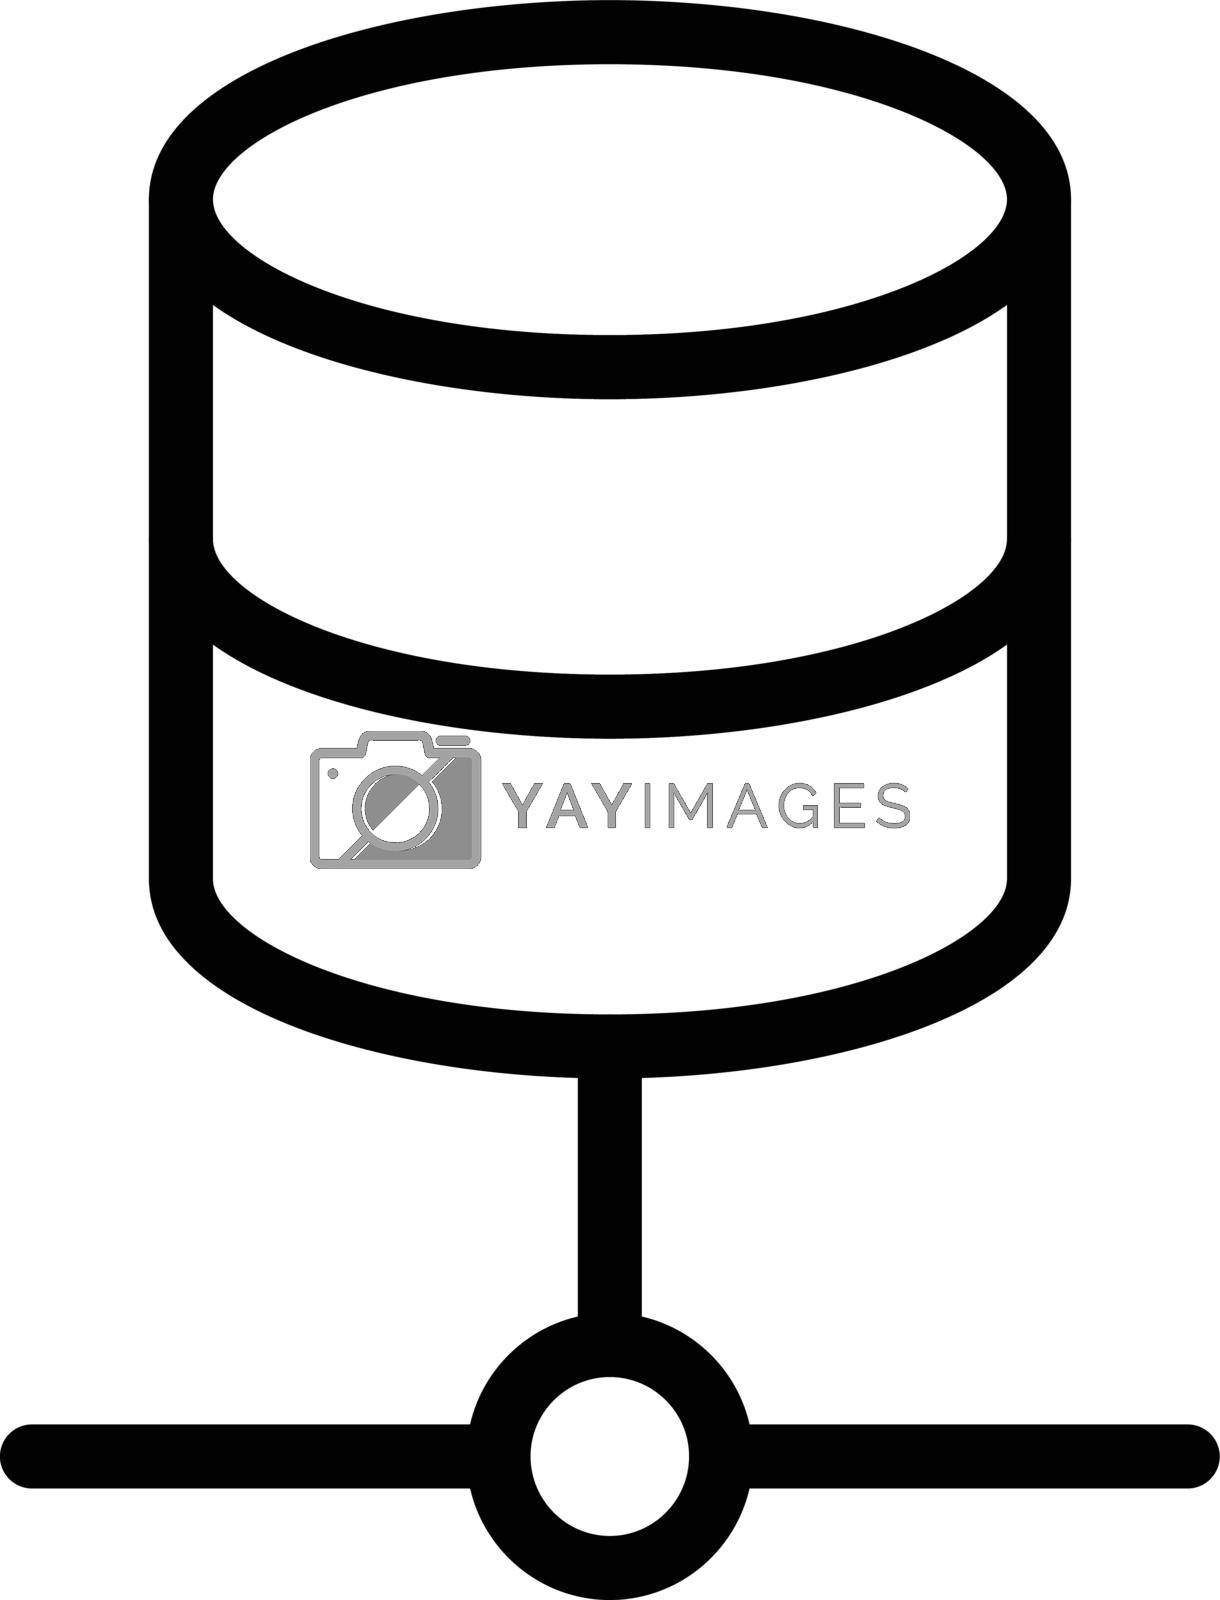 Royalty free image of database by vectorstall